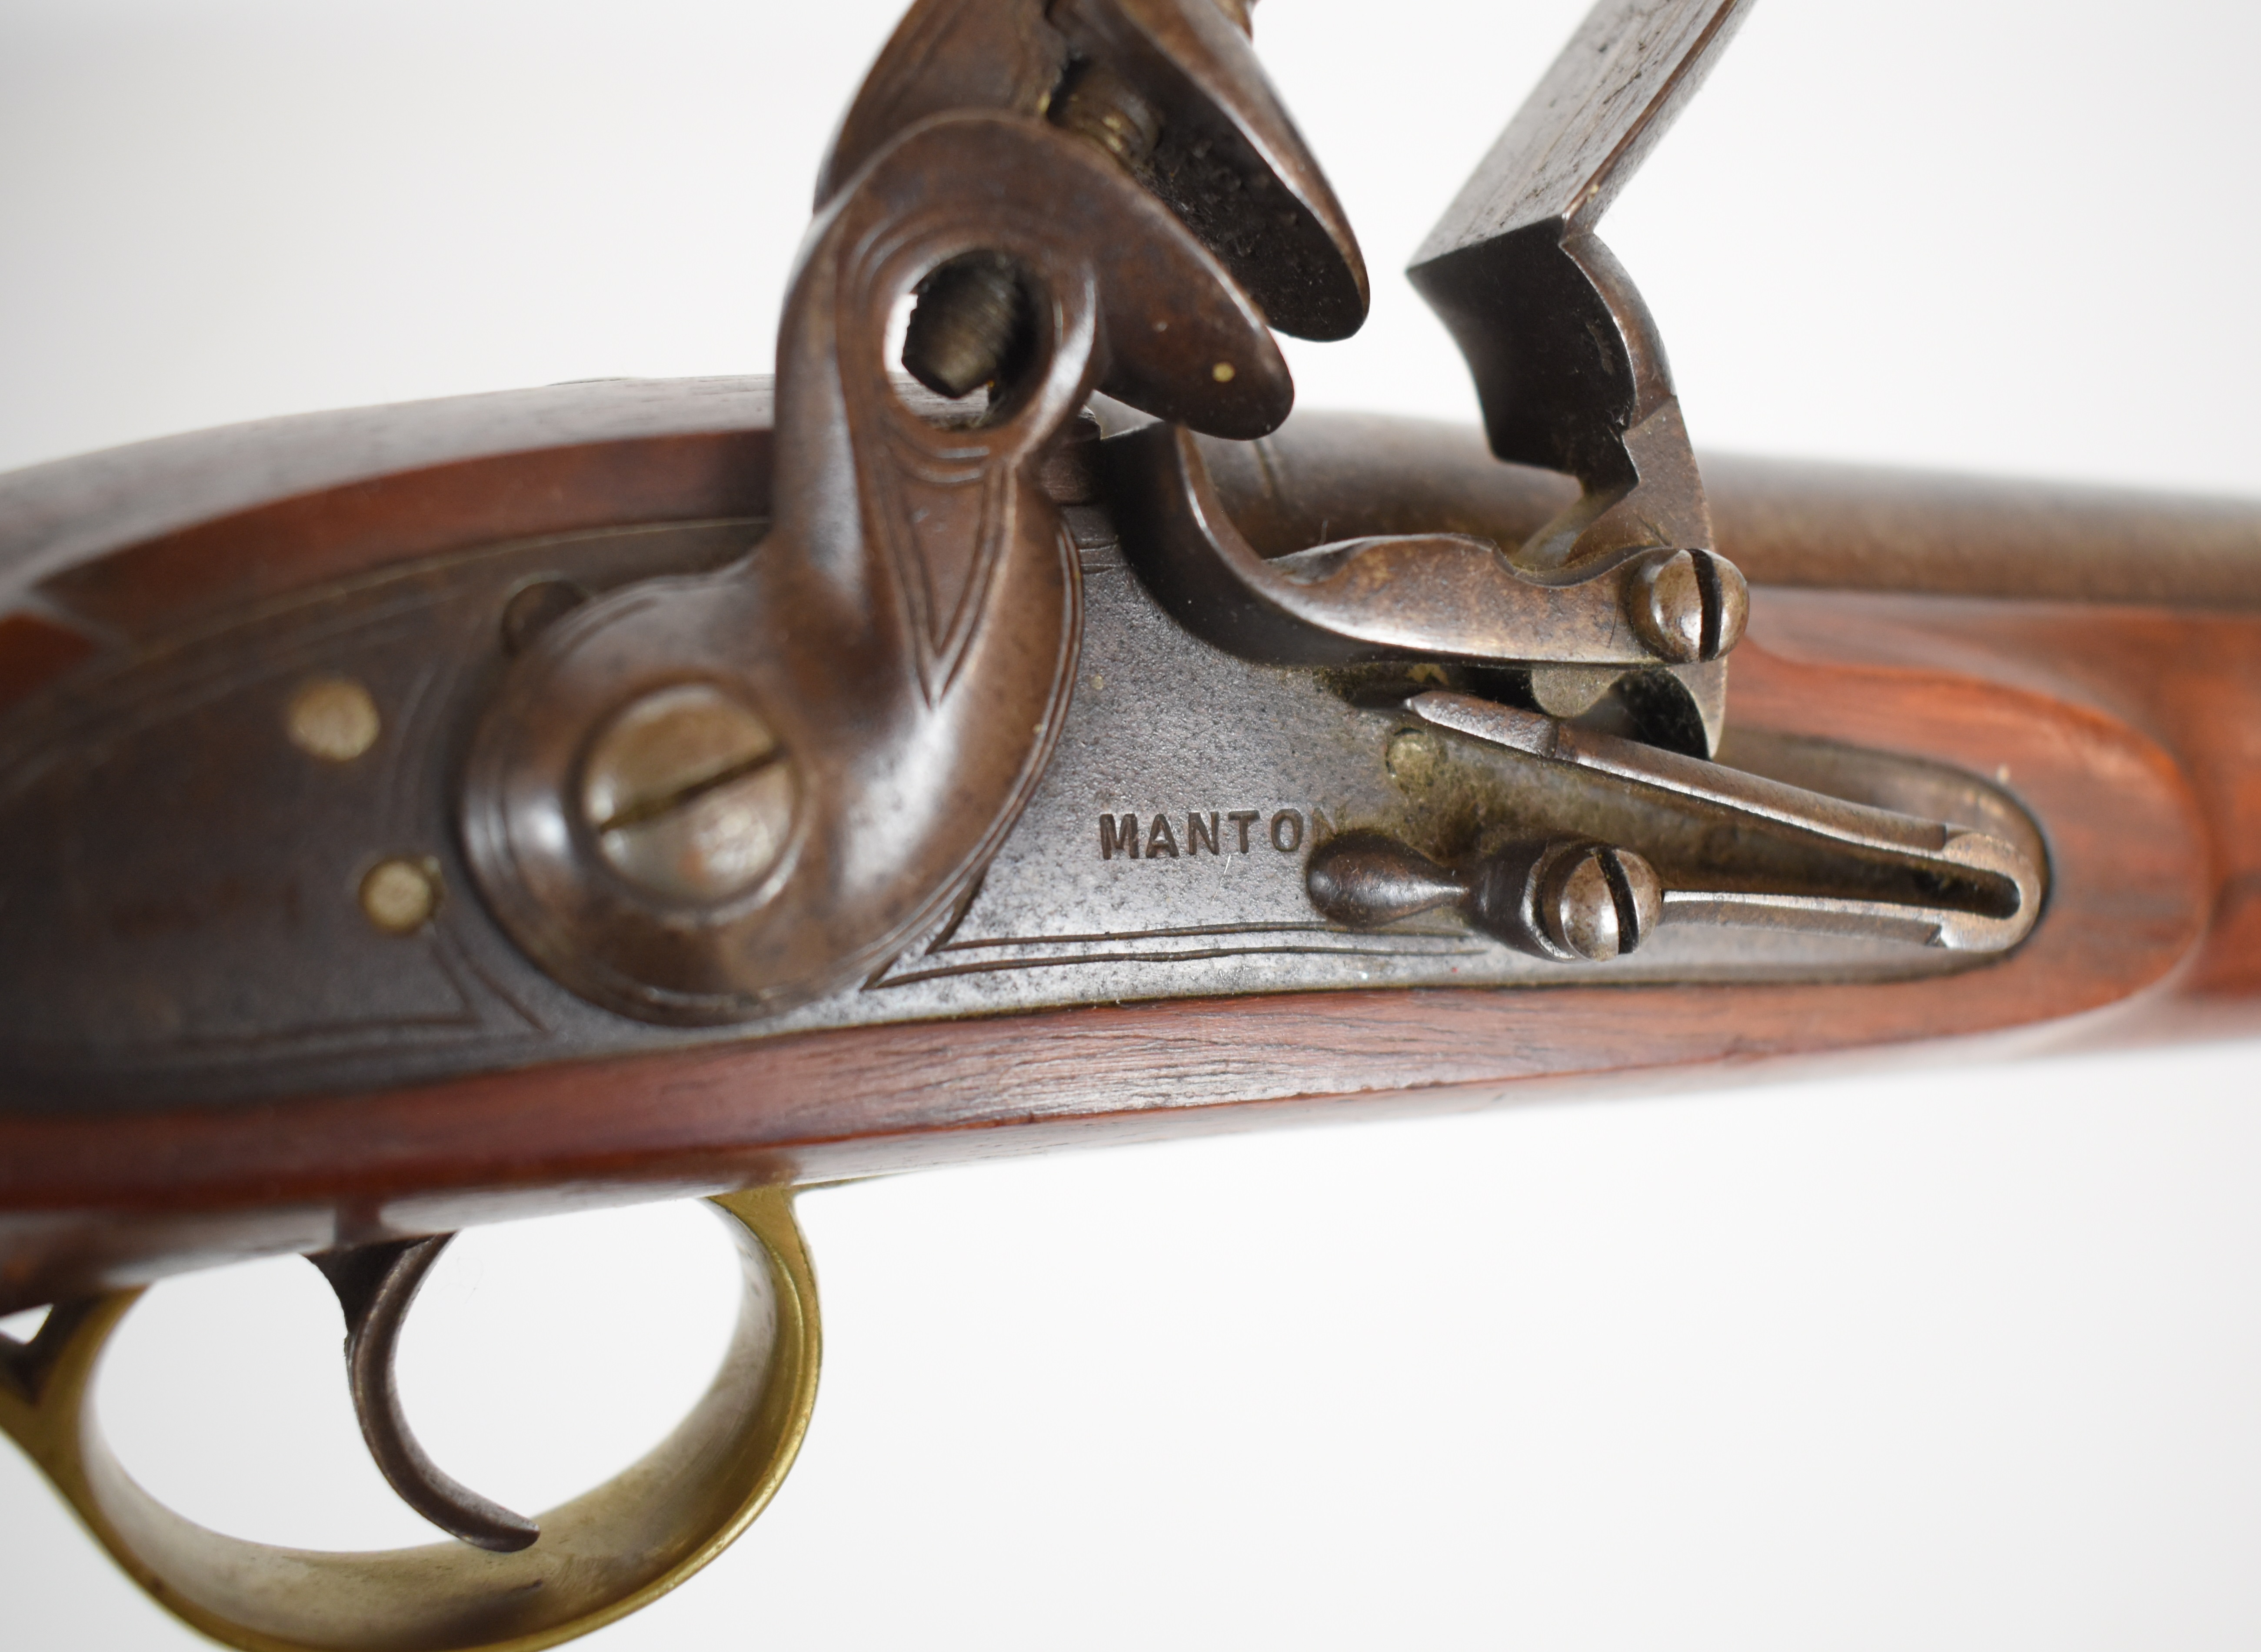 Replica flintlock pistol with lock stamped 'Manton', brass trigger guard, butt plate and mounts, - Image 2 of 4